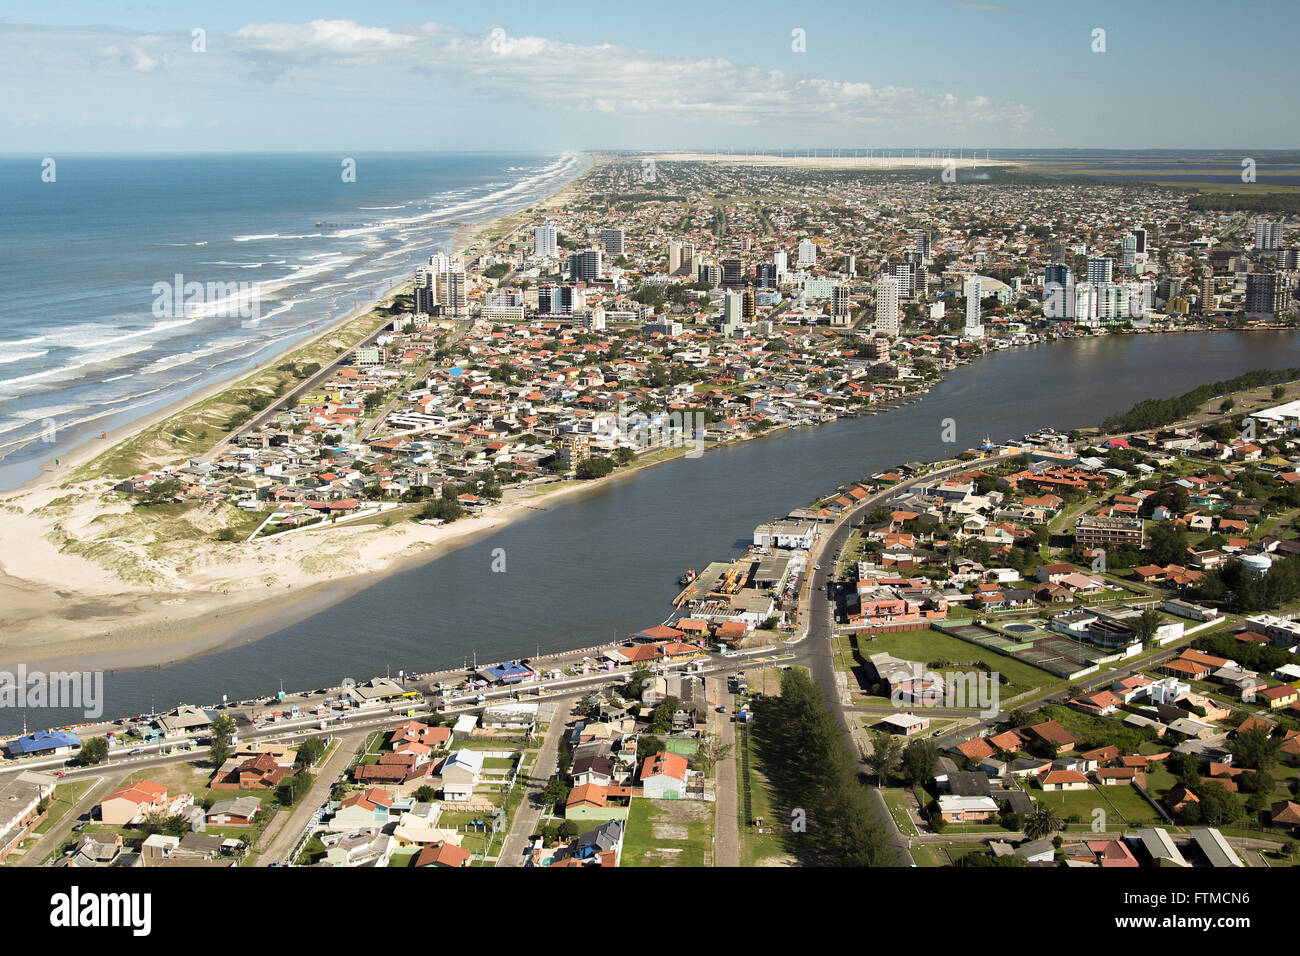 Aerial view of the city on the north coast of the state Stock Photo